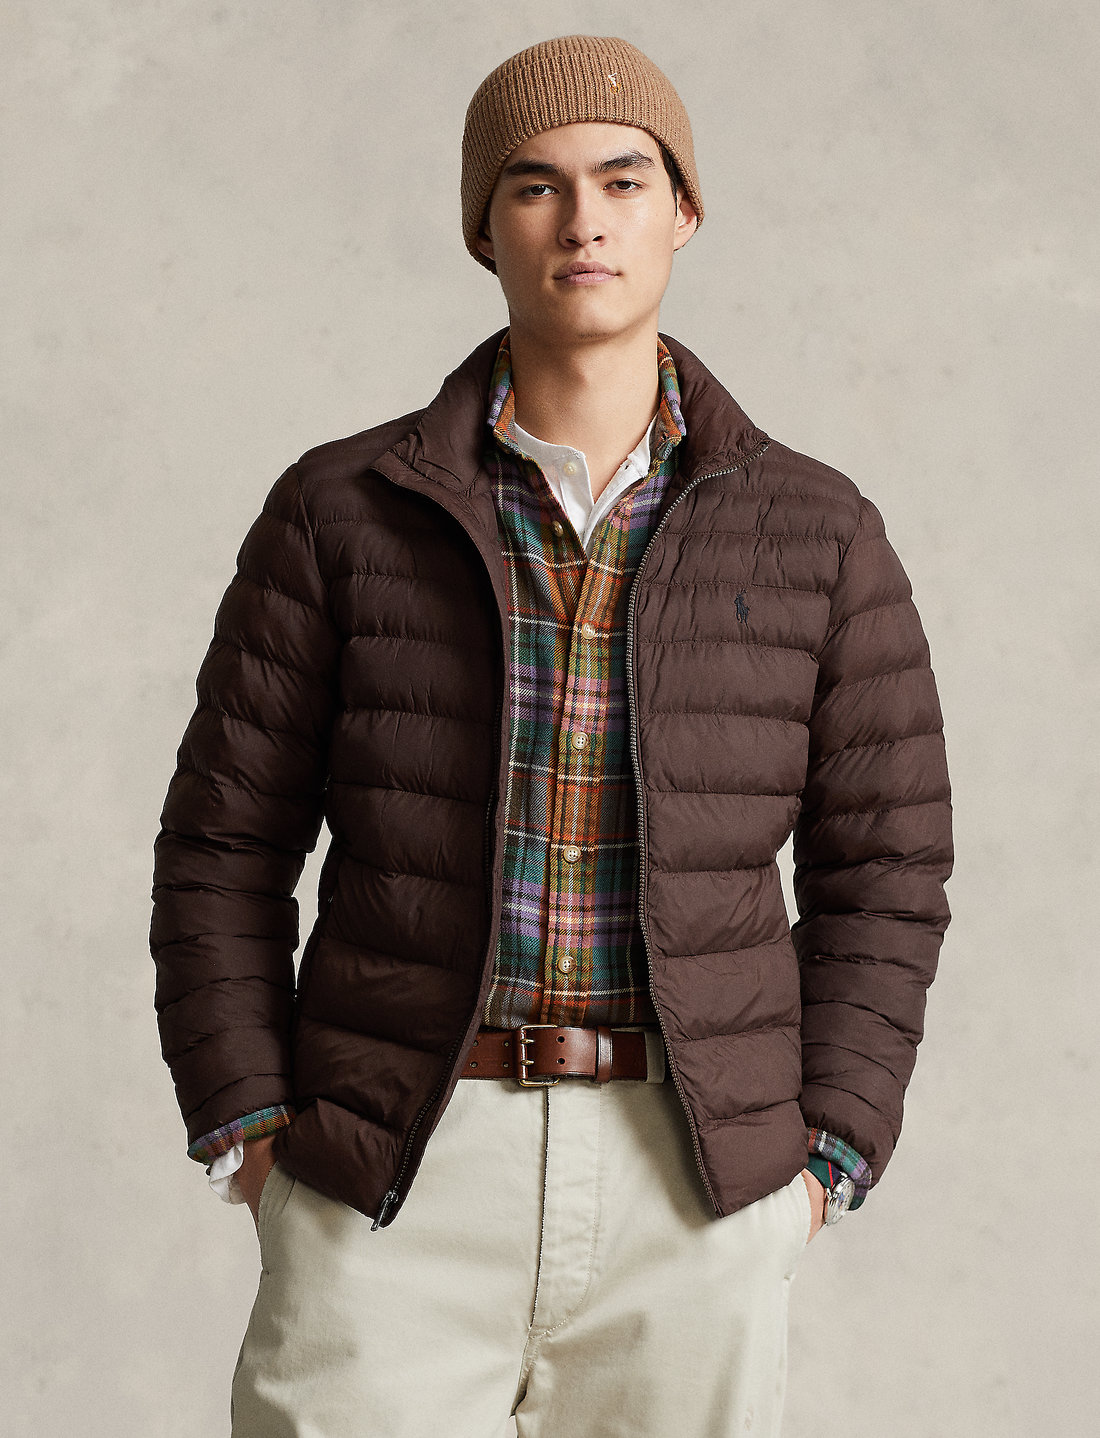 Ralph Lauren The Packable Jacket - 349 Buy Padded jackets from Ralph Lauren online at Boozt.com. Fast delivery and easy returns